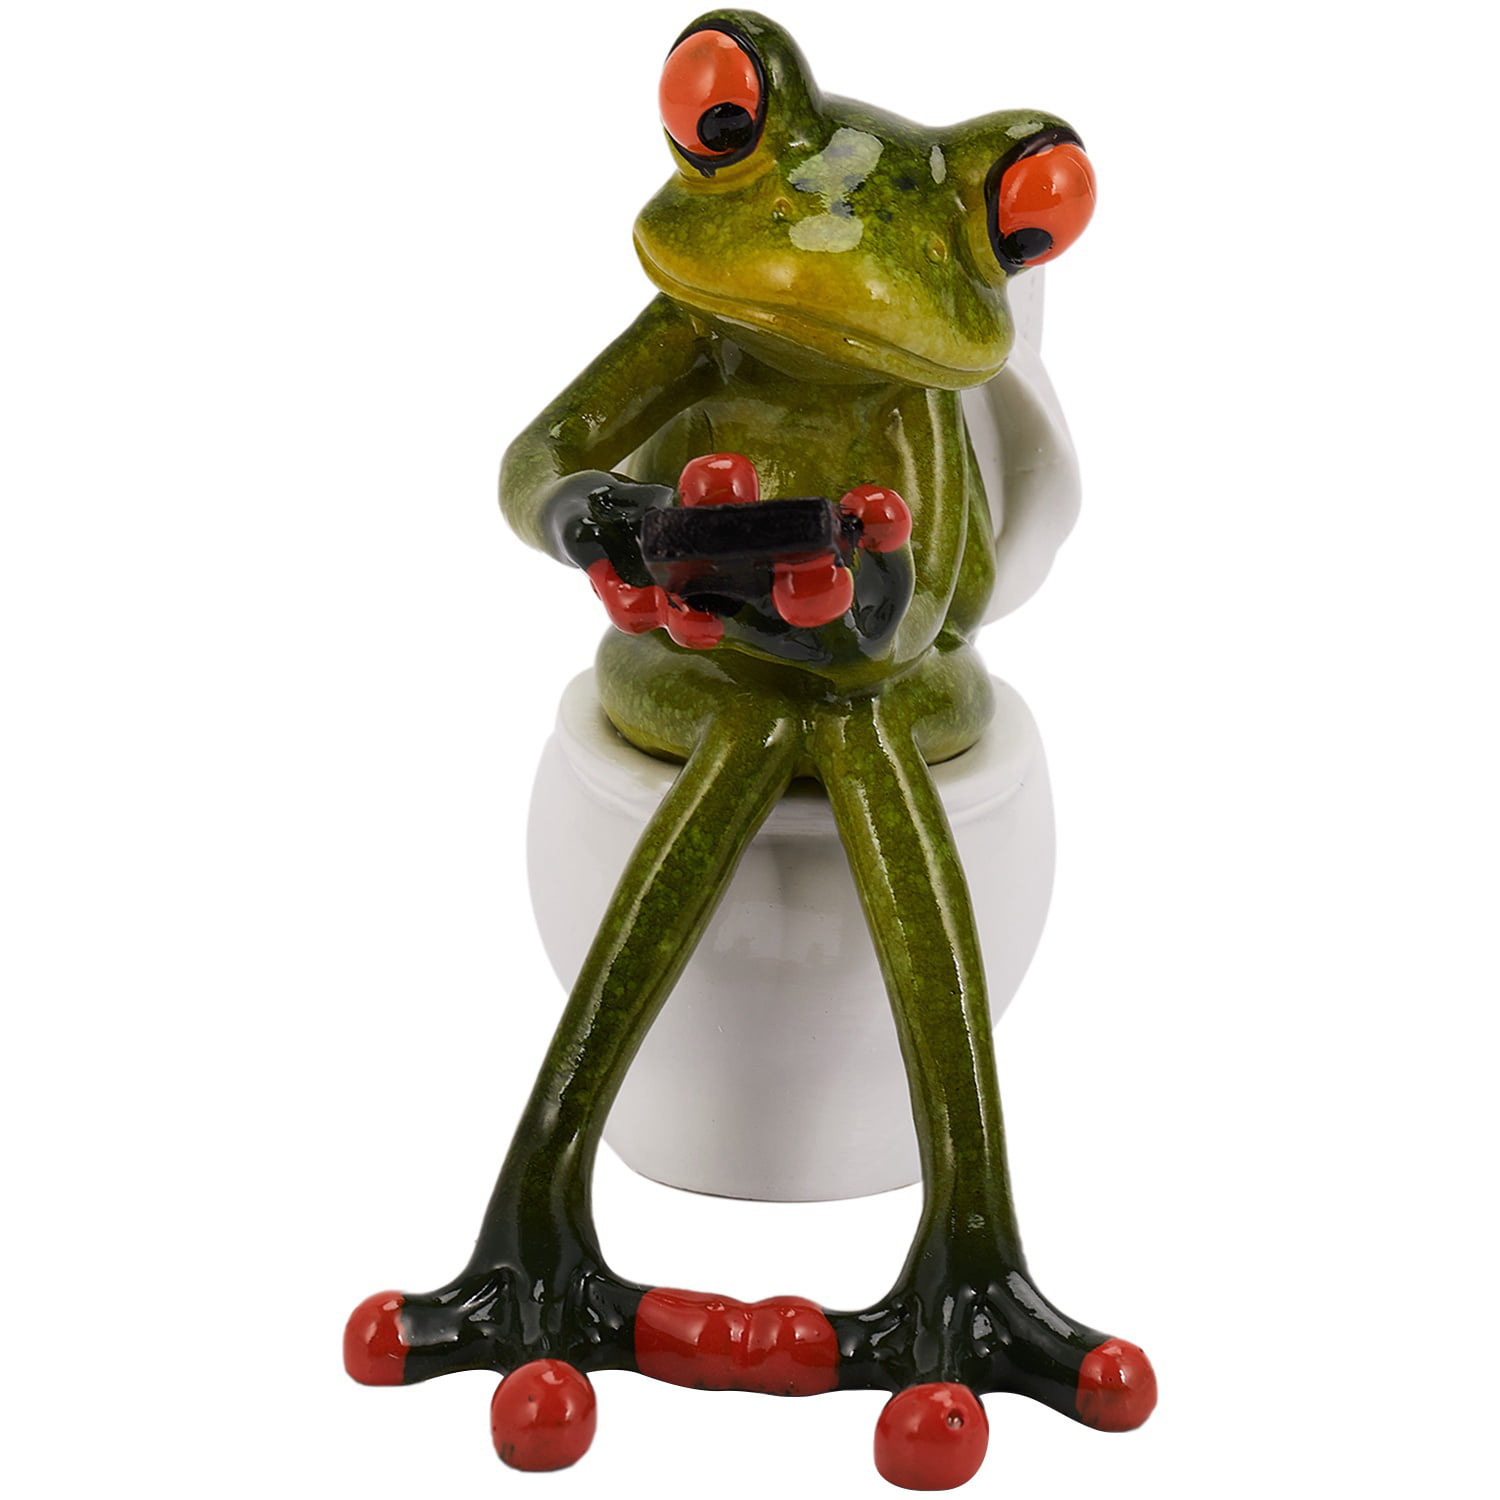 Resin Frog Figurines 3D Cute Crafts Sitting Toilet Ornaments Home Decor A 